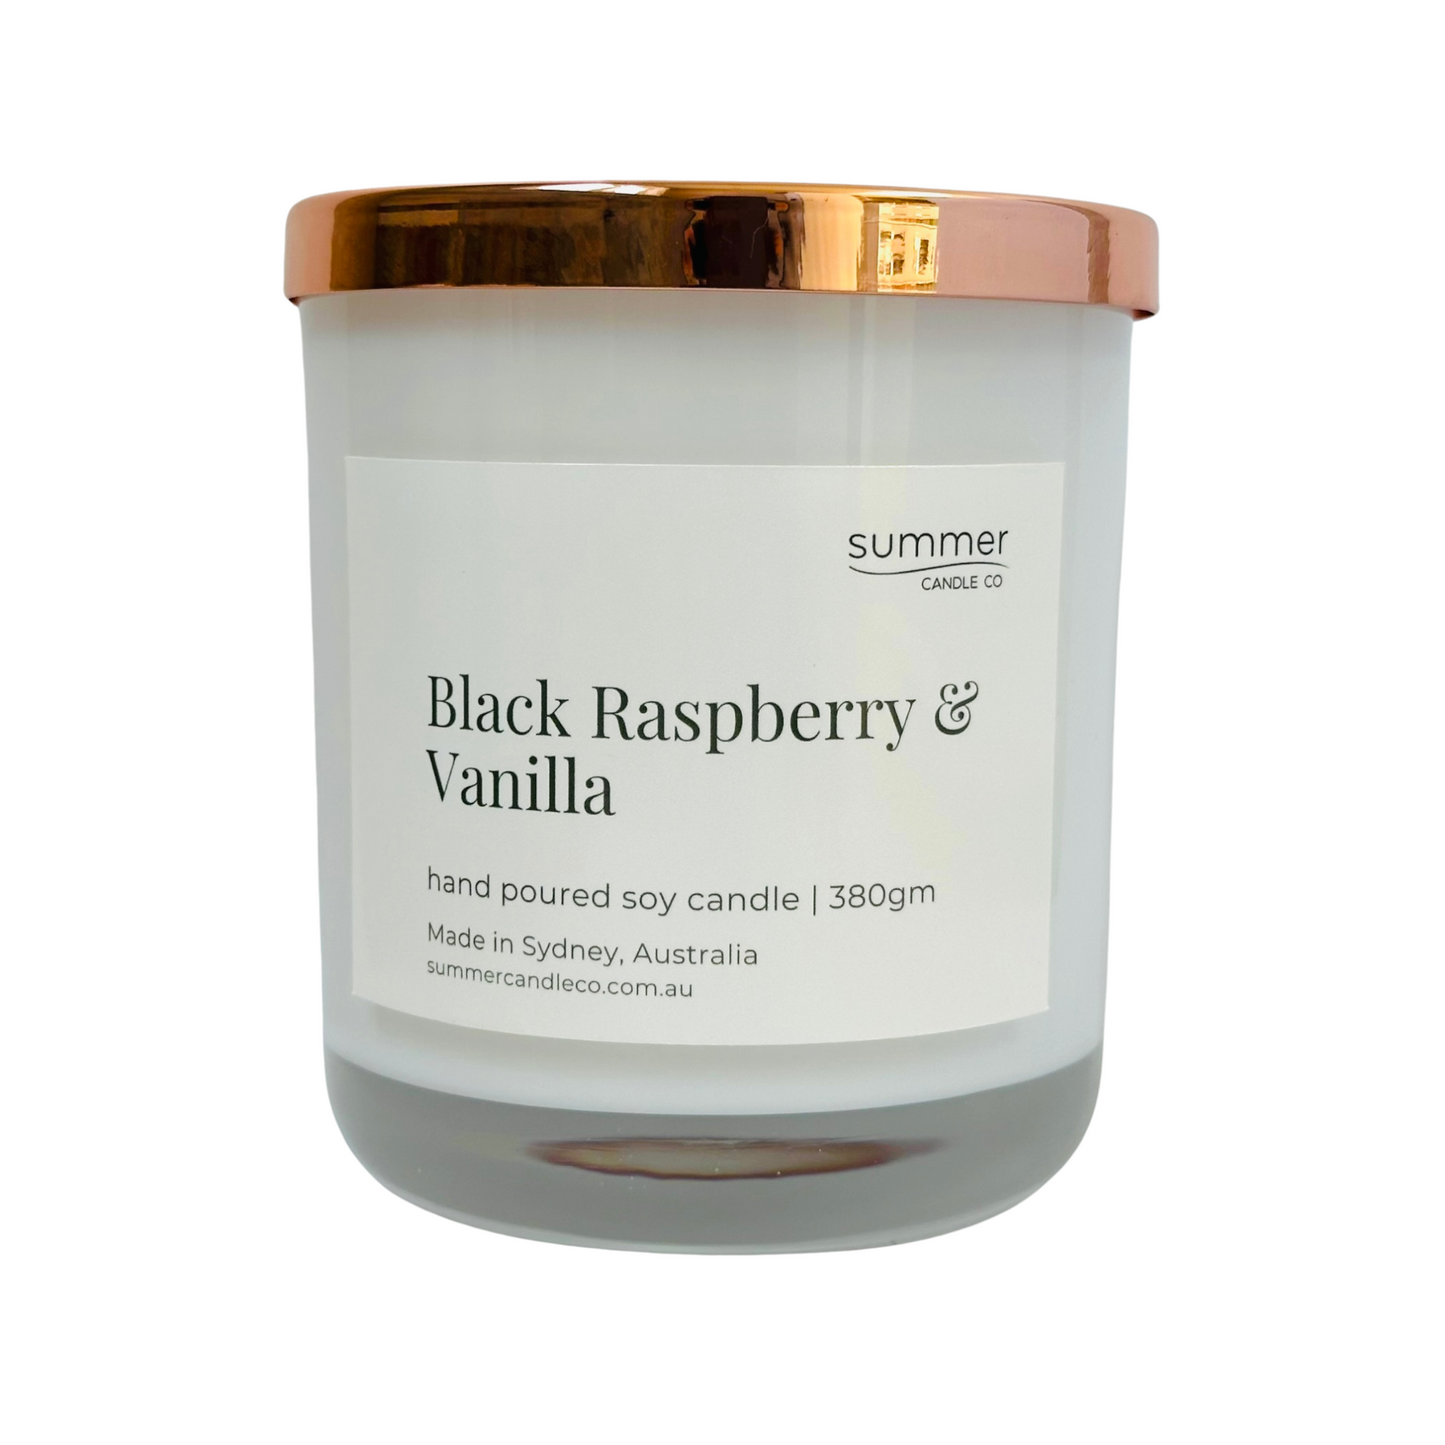 Lovely Hand Poured Soy Candle 380gram Fragrance of Black Raspberry & Vanilla